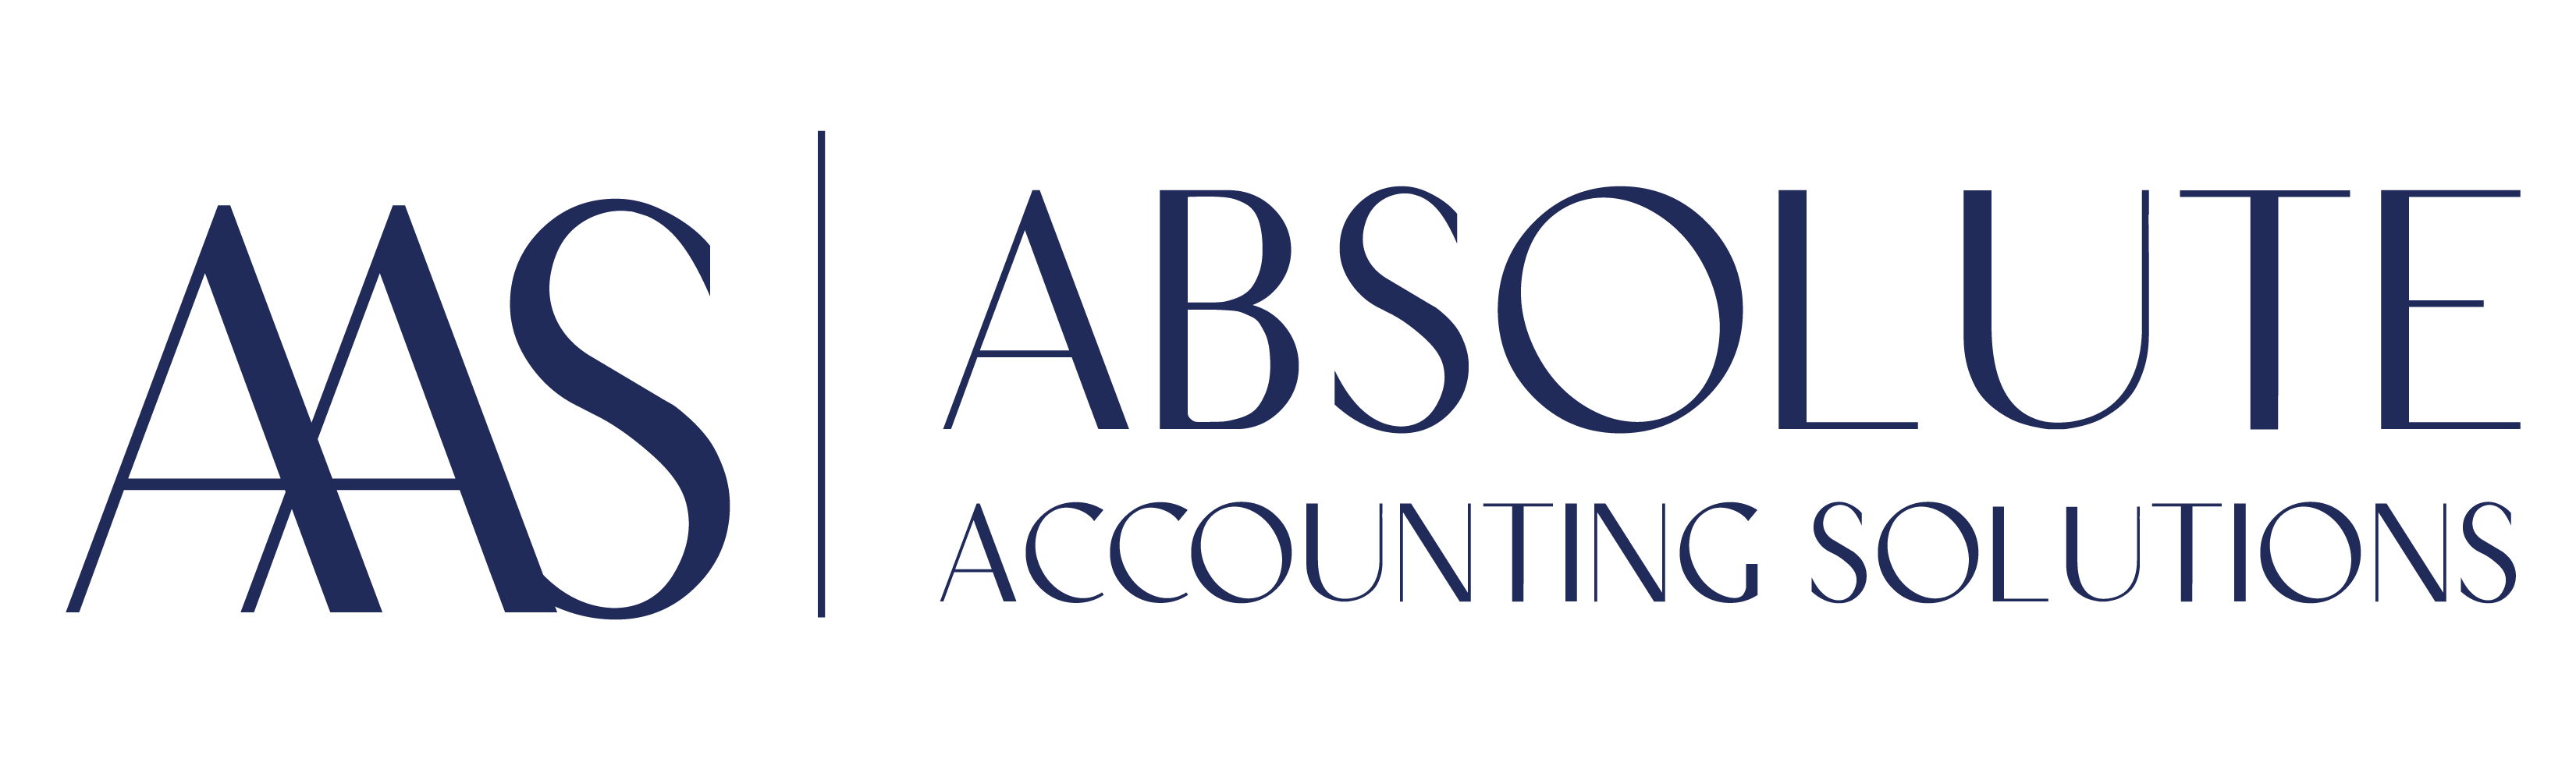 Absolute Accounting Solutions, LLC